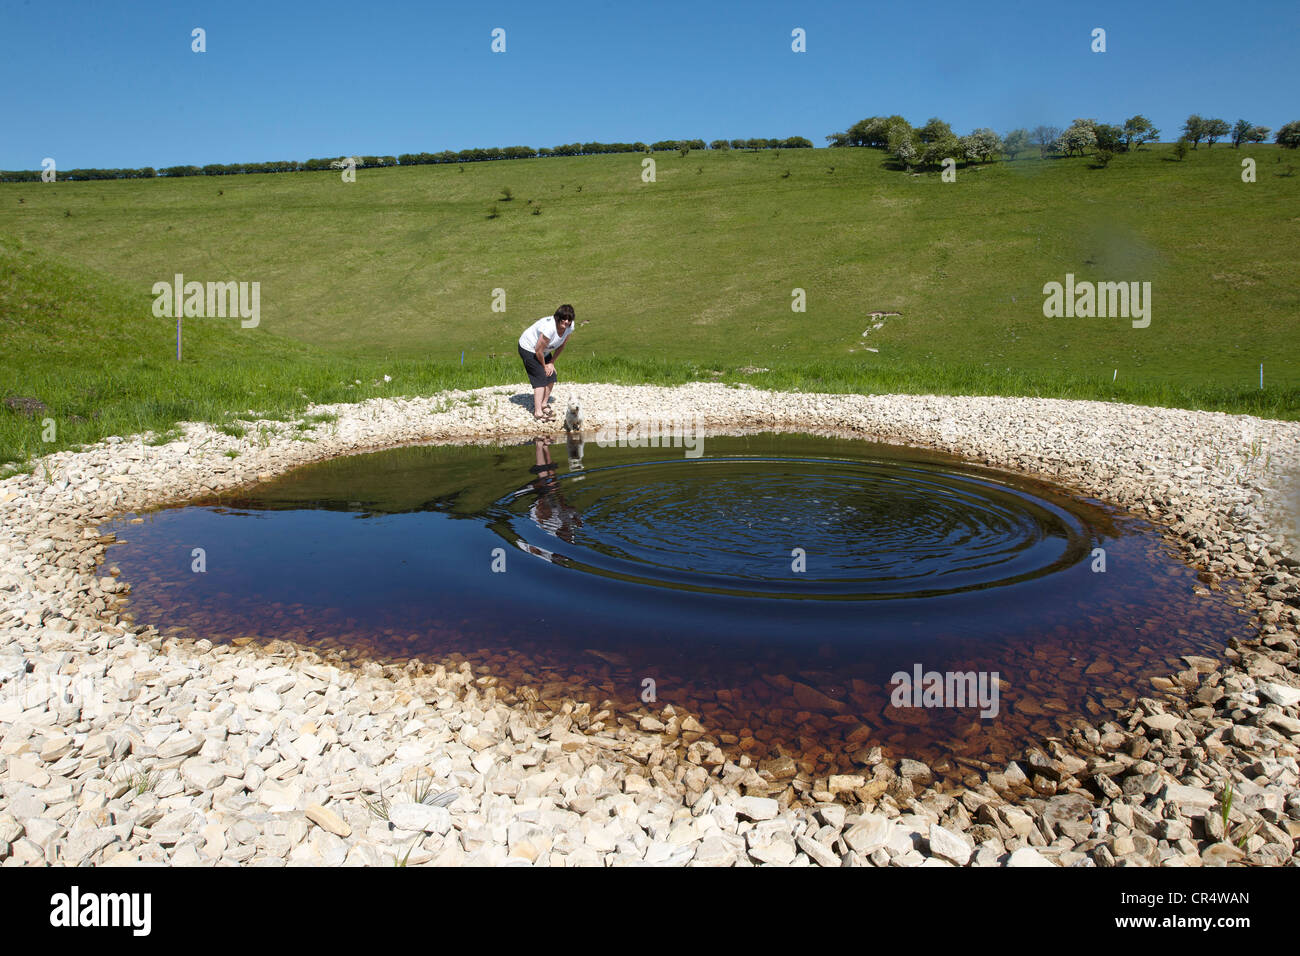 One of ten outdoor sculptures called waves and time created by Chris Drury,  Thixendale, East Yorkshire, UK Stock Photo - Alamy